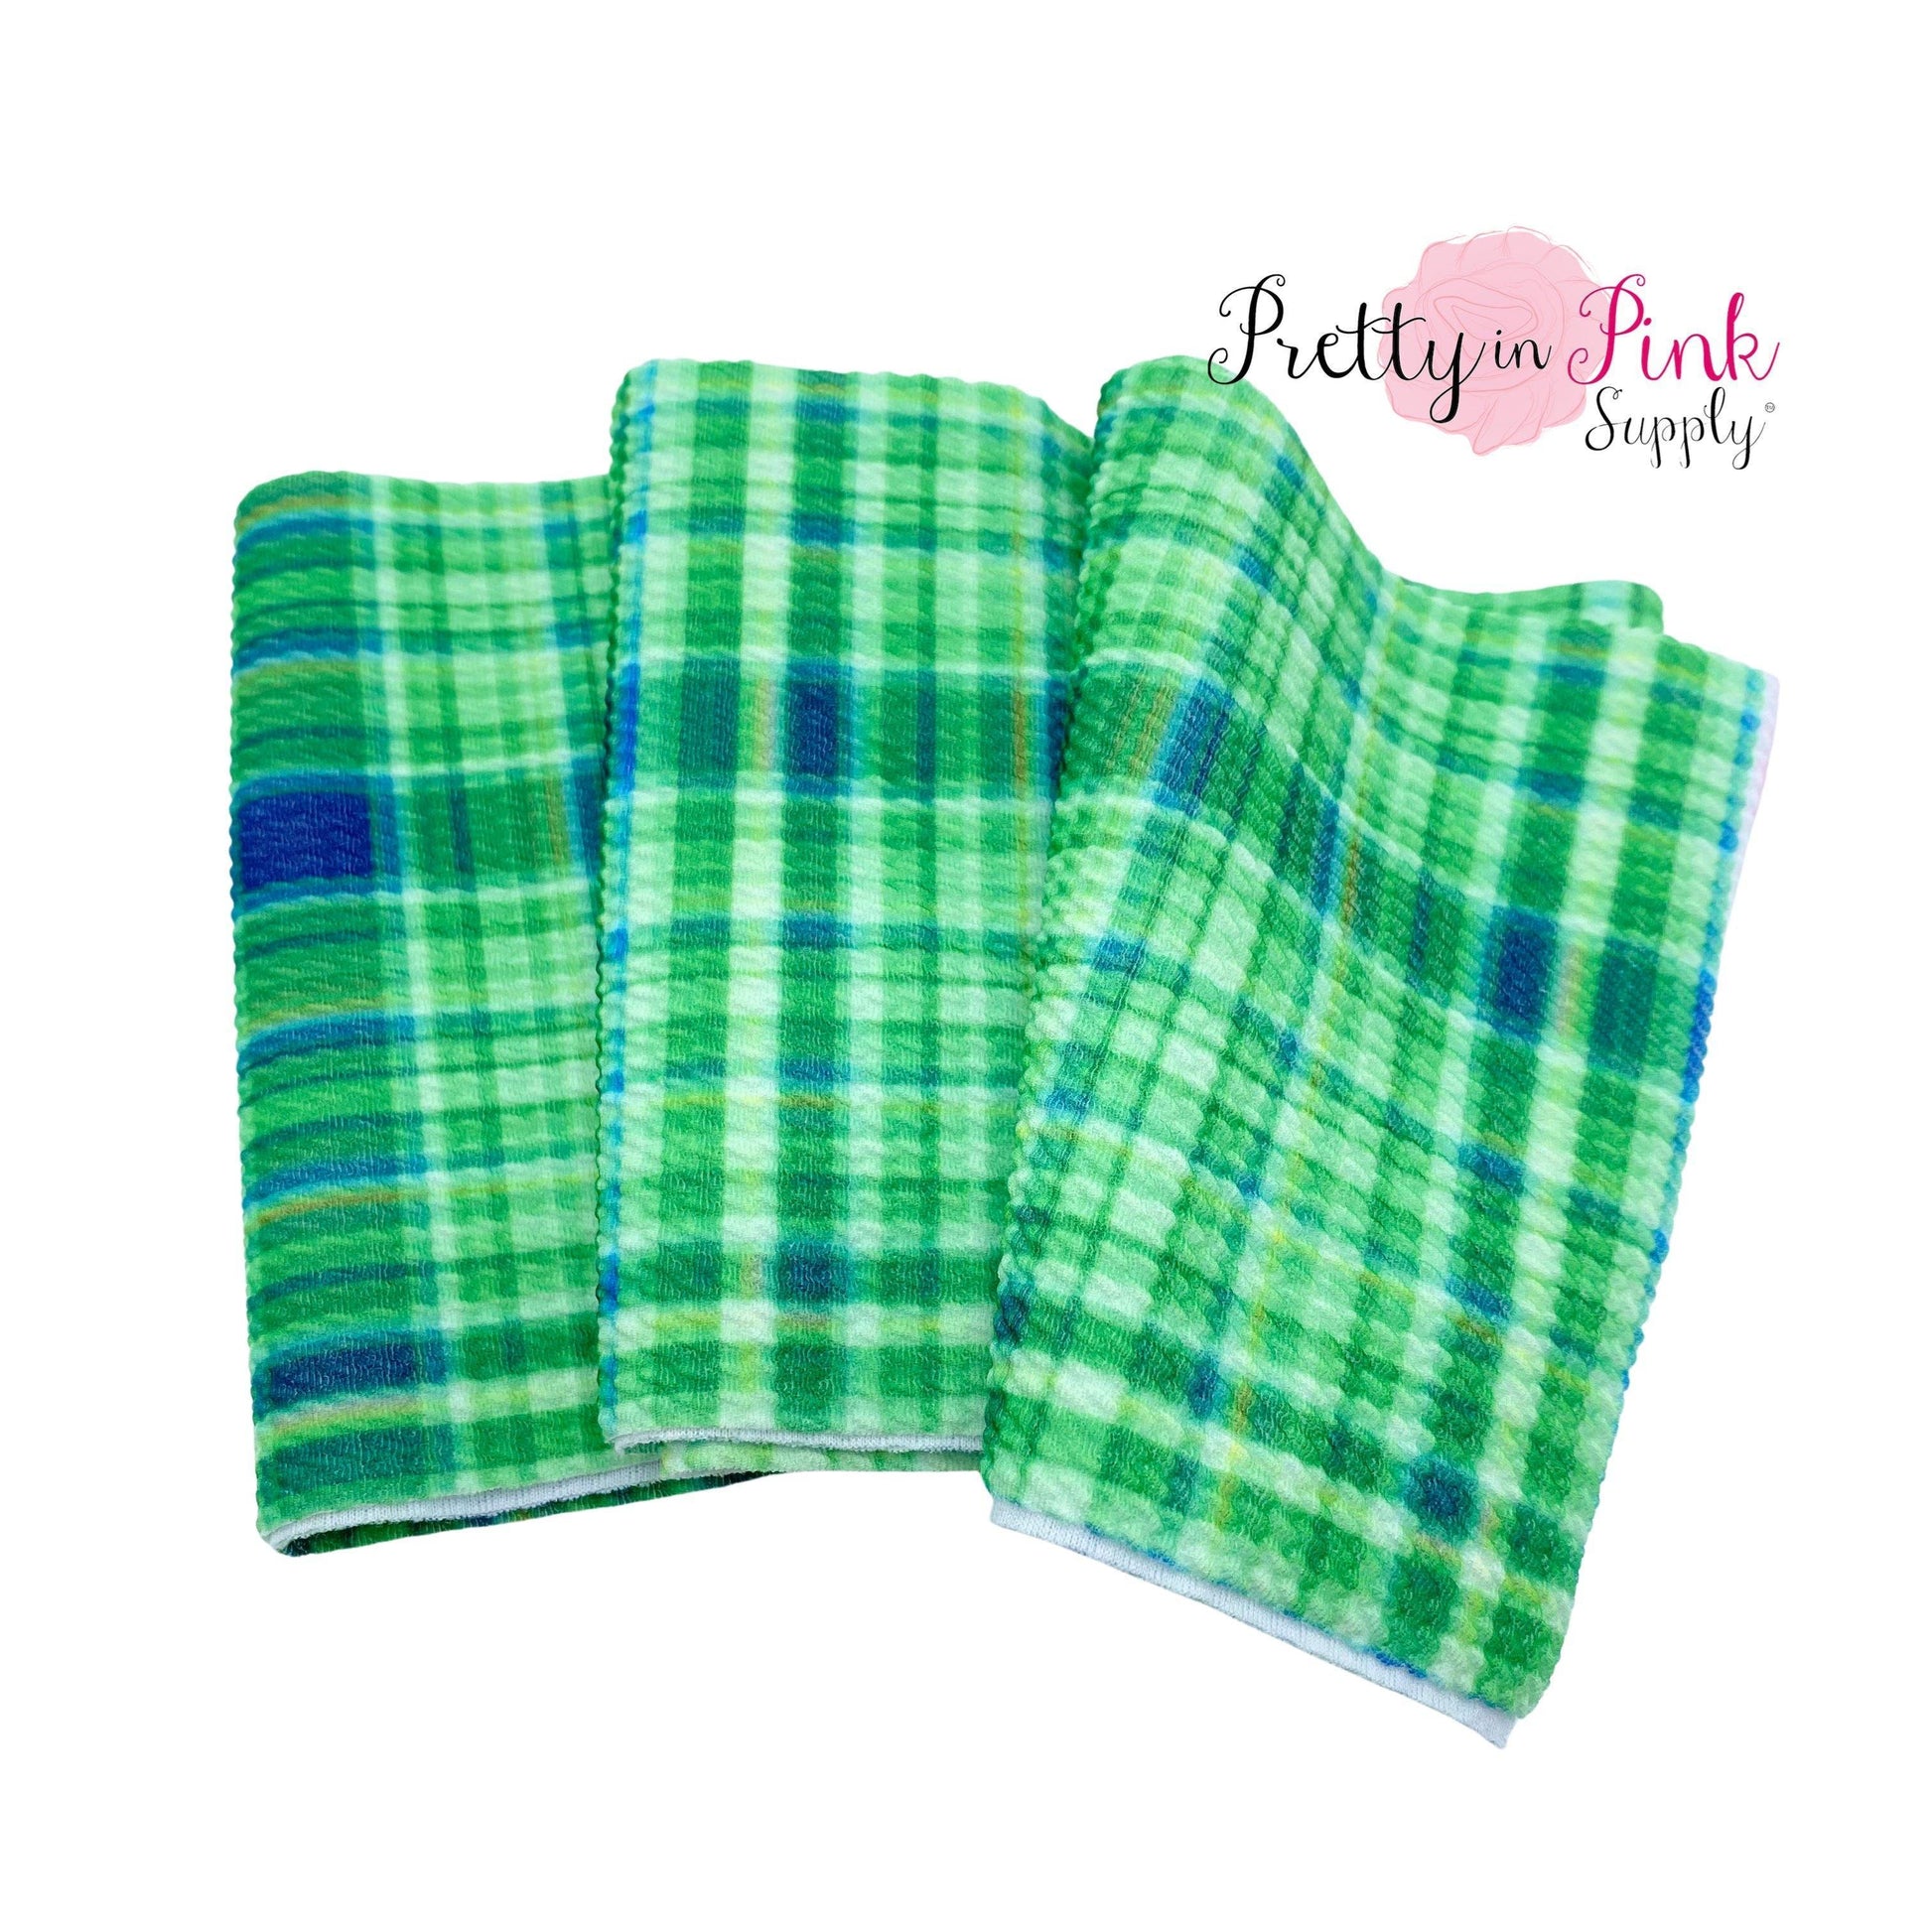 Folded liverpool fabric strip with green and blue plaid pattern.